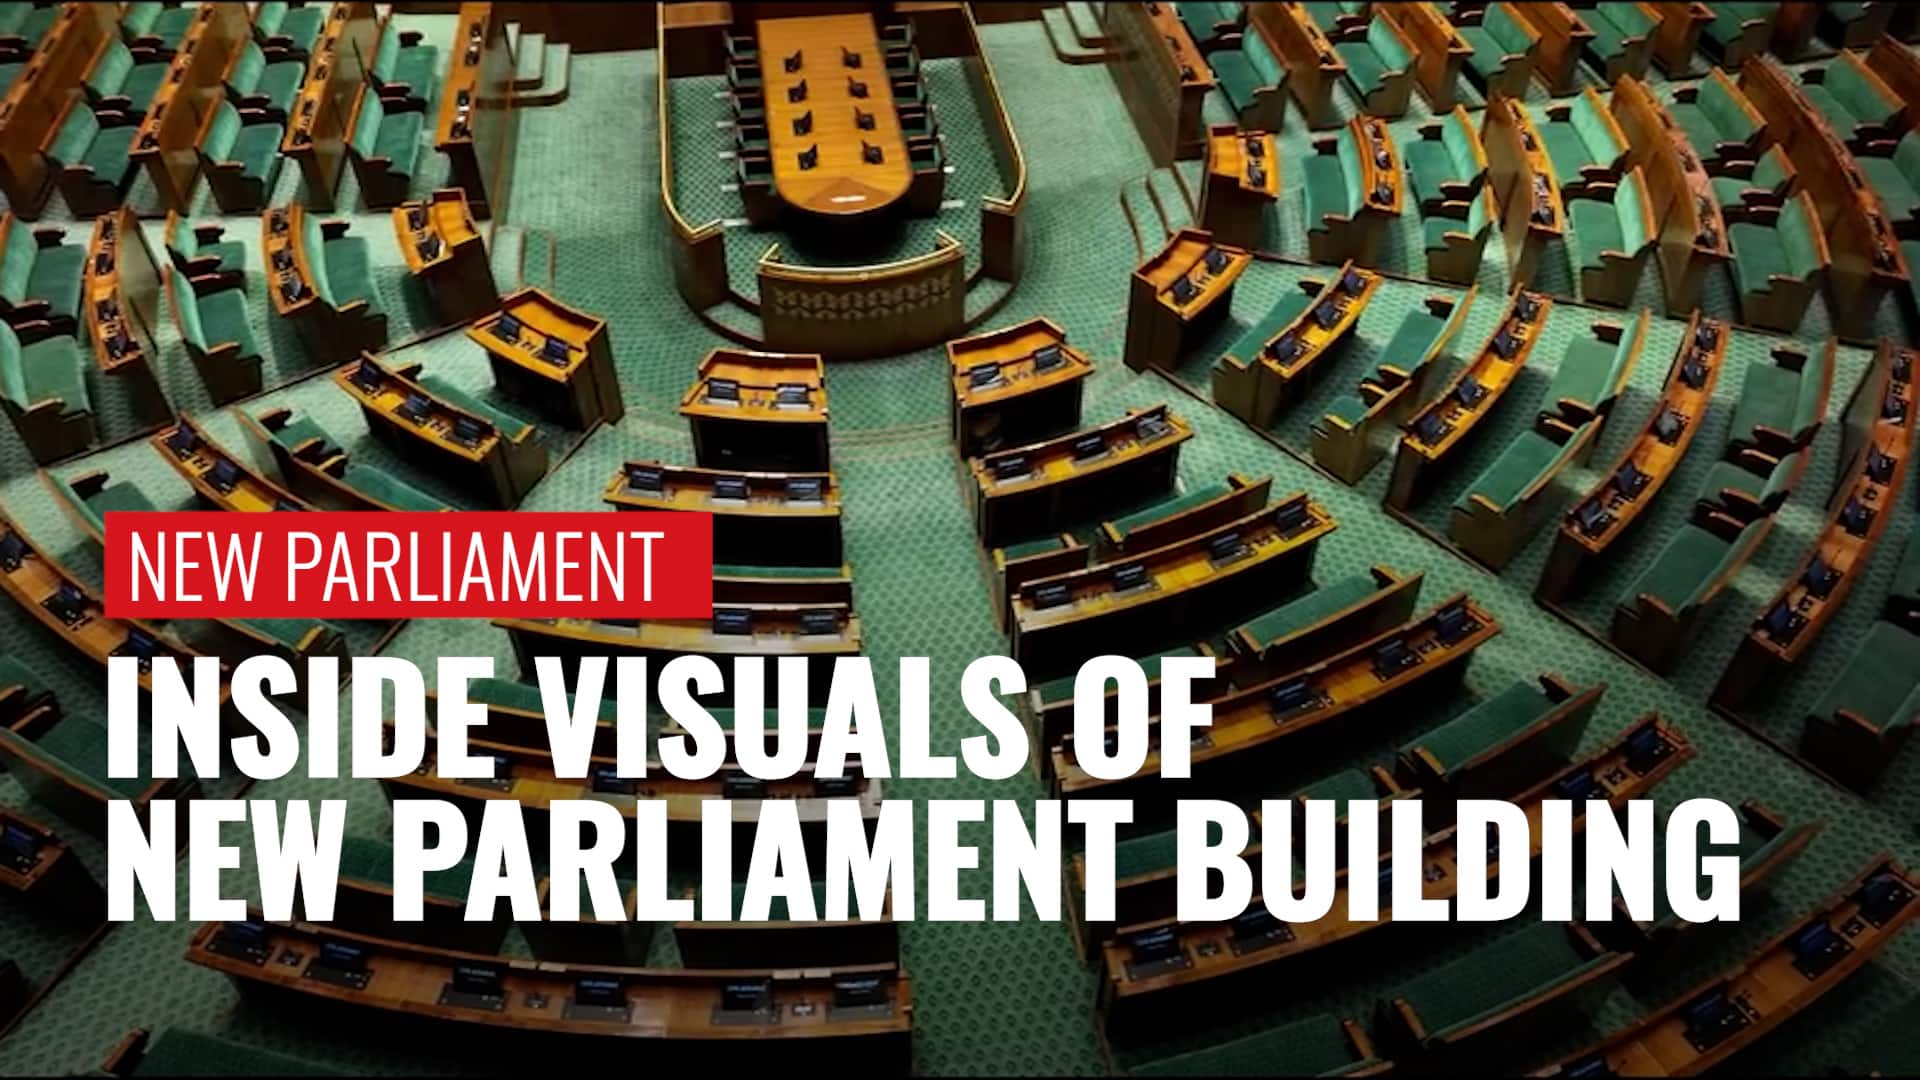 Watch Inside Visuals Of The New Parliament Building, With Peacock